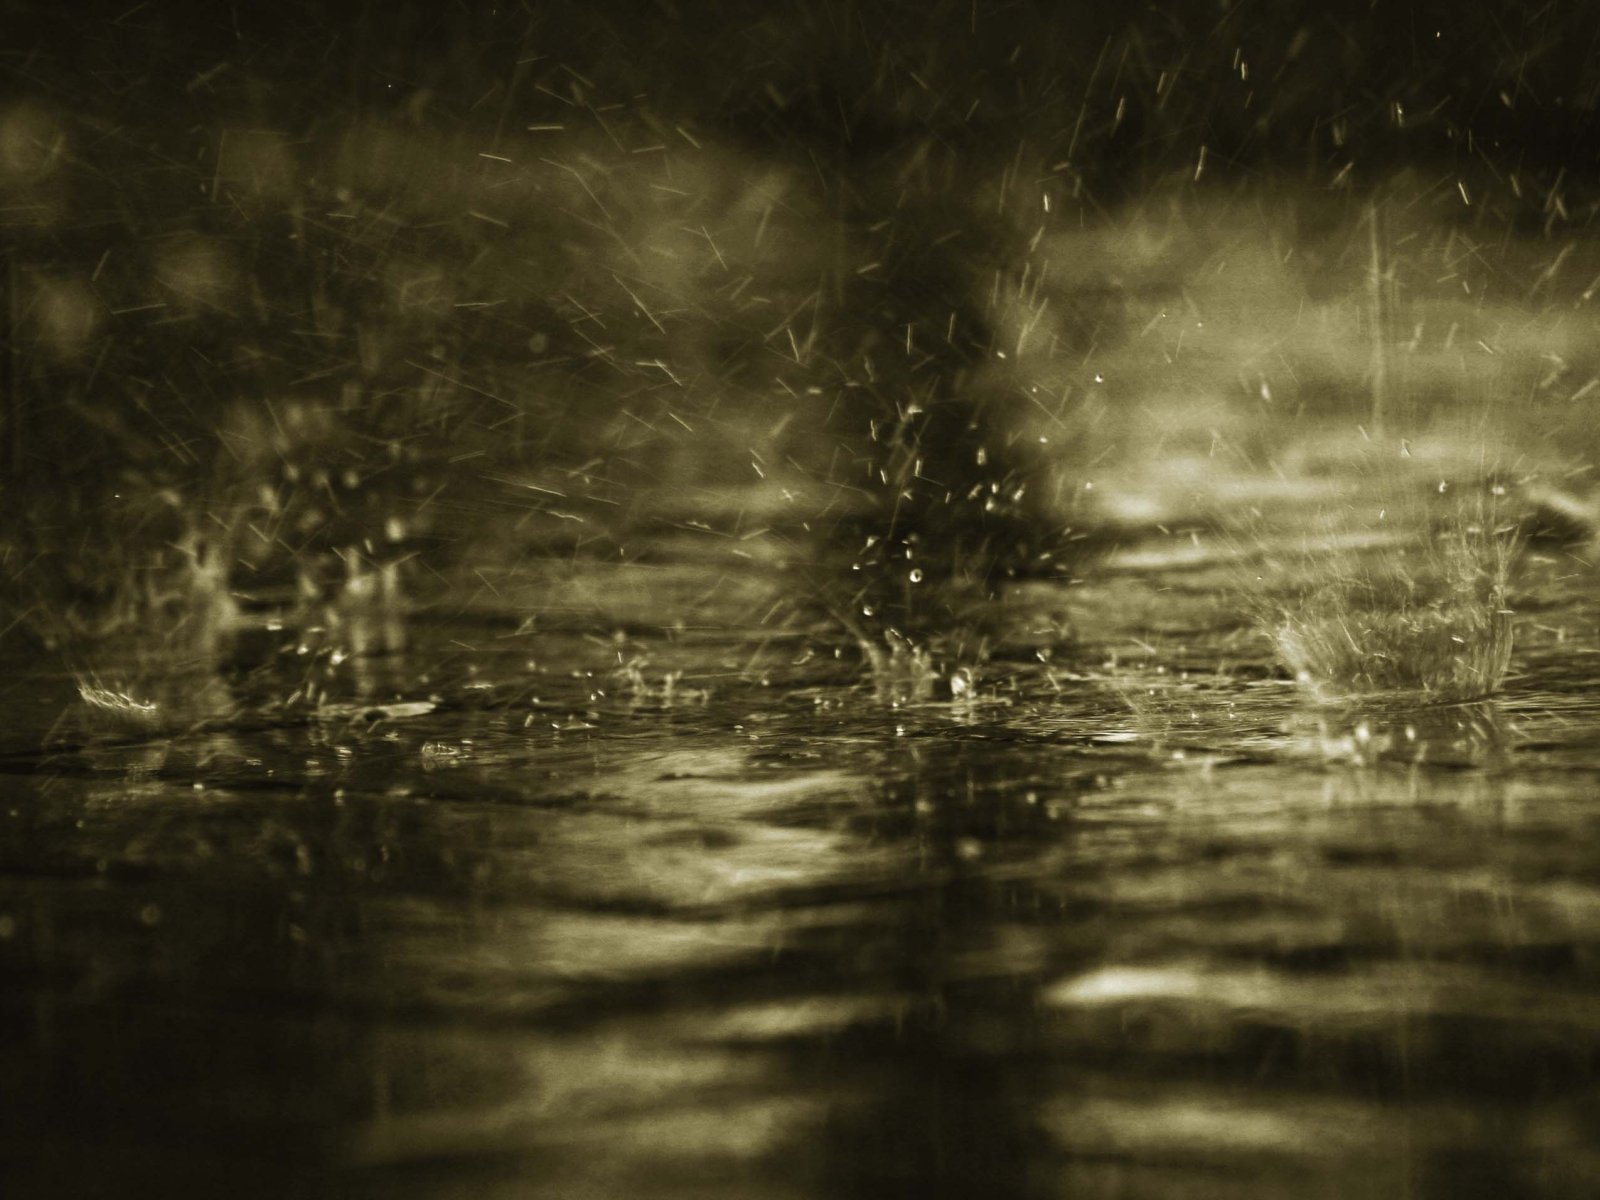  pictures rain pictures alone in rain pictures hd love wallpapers 1600x1200